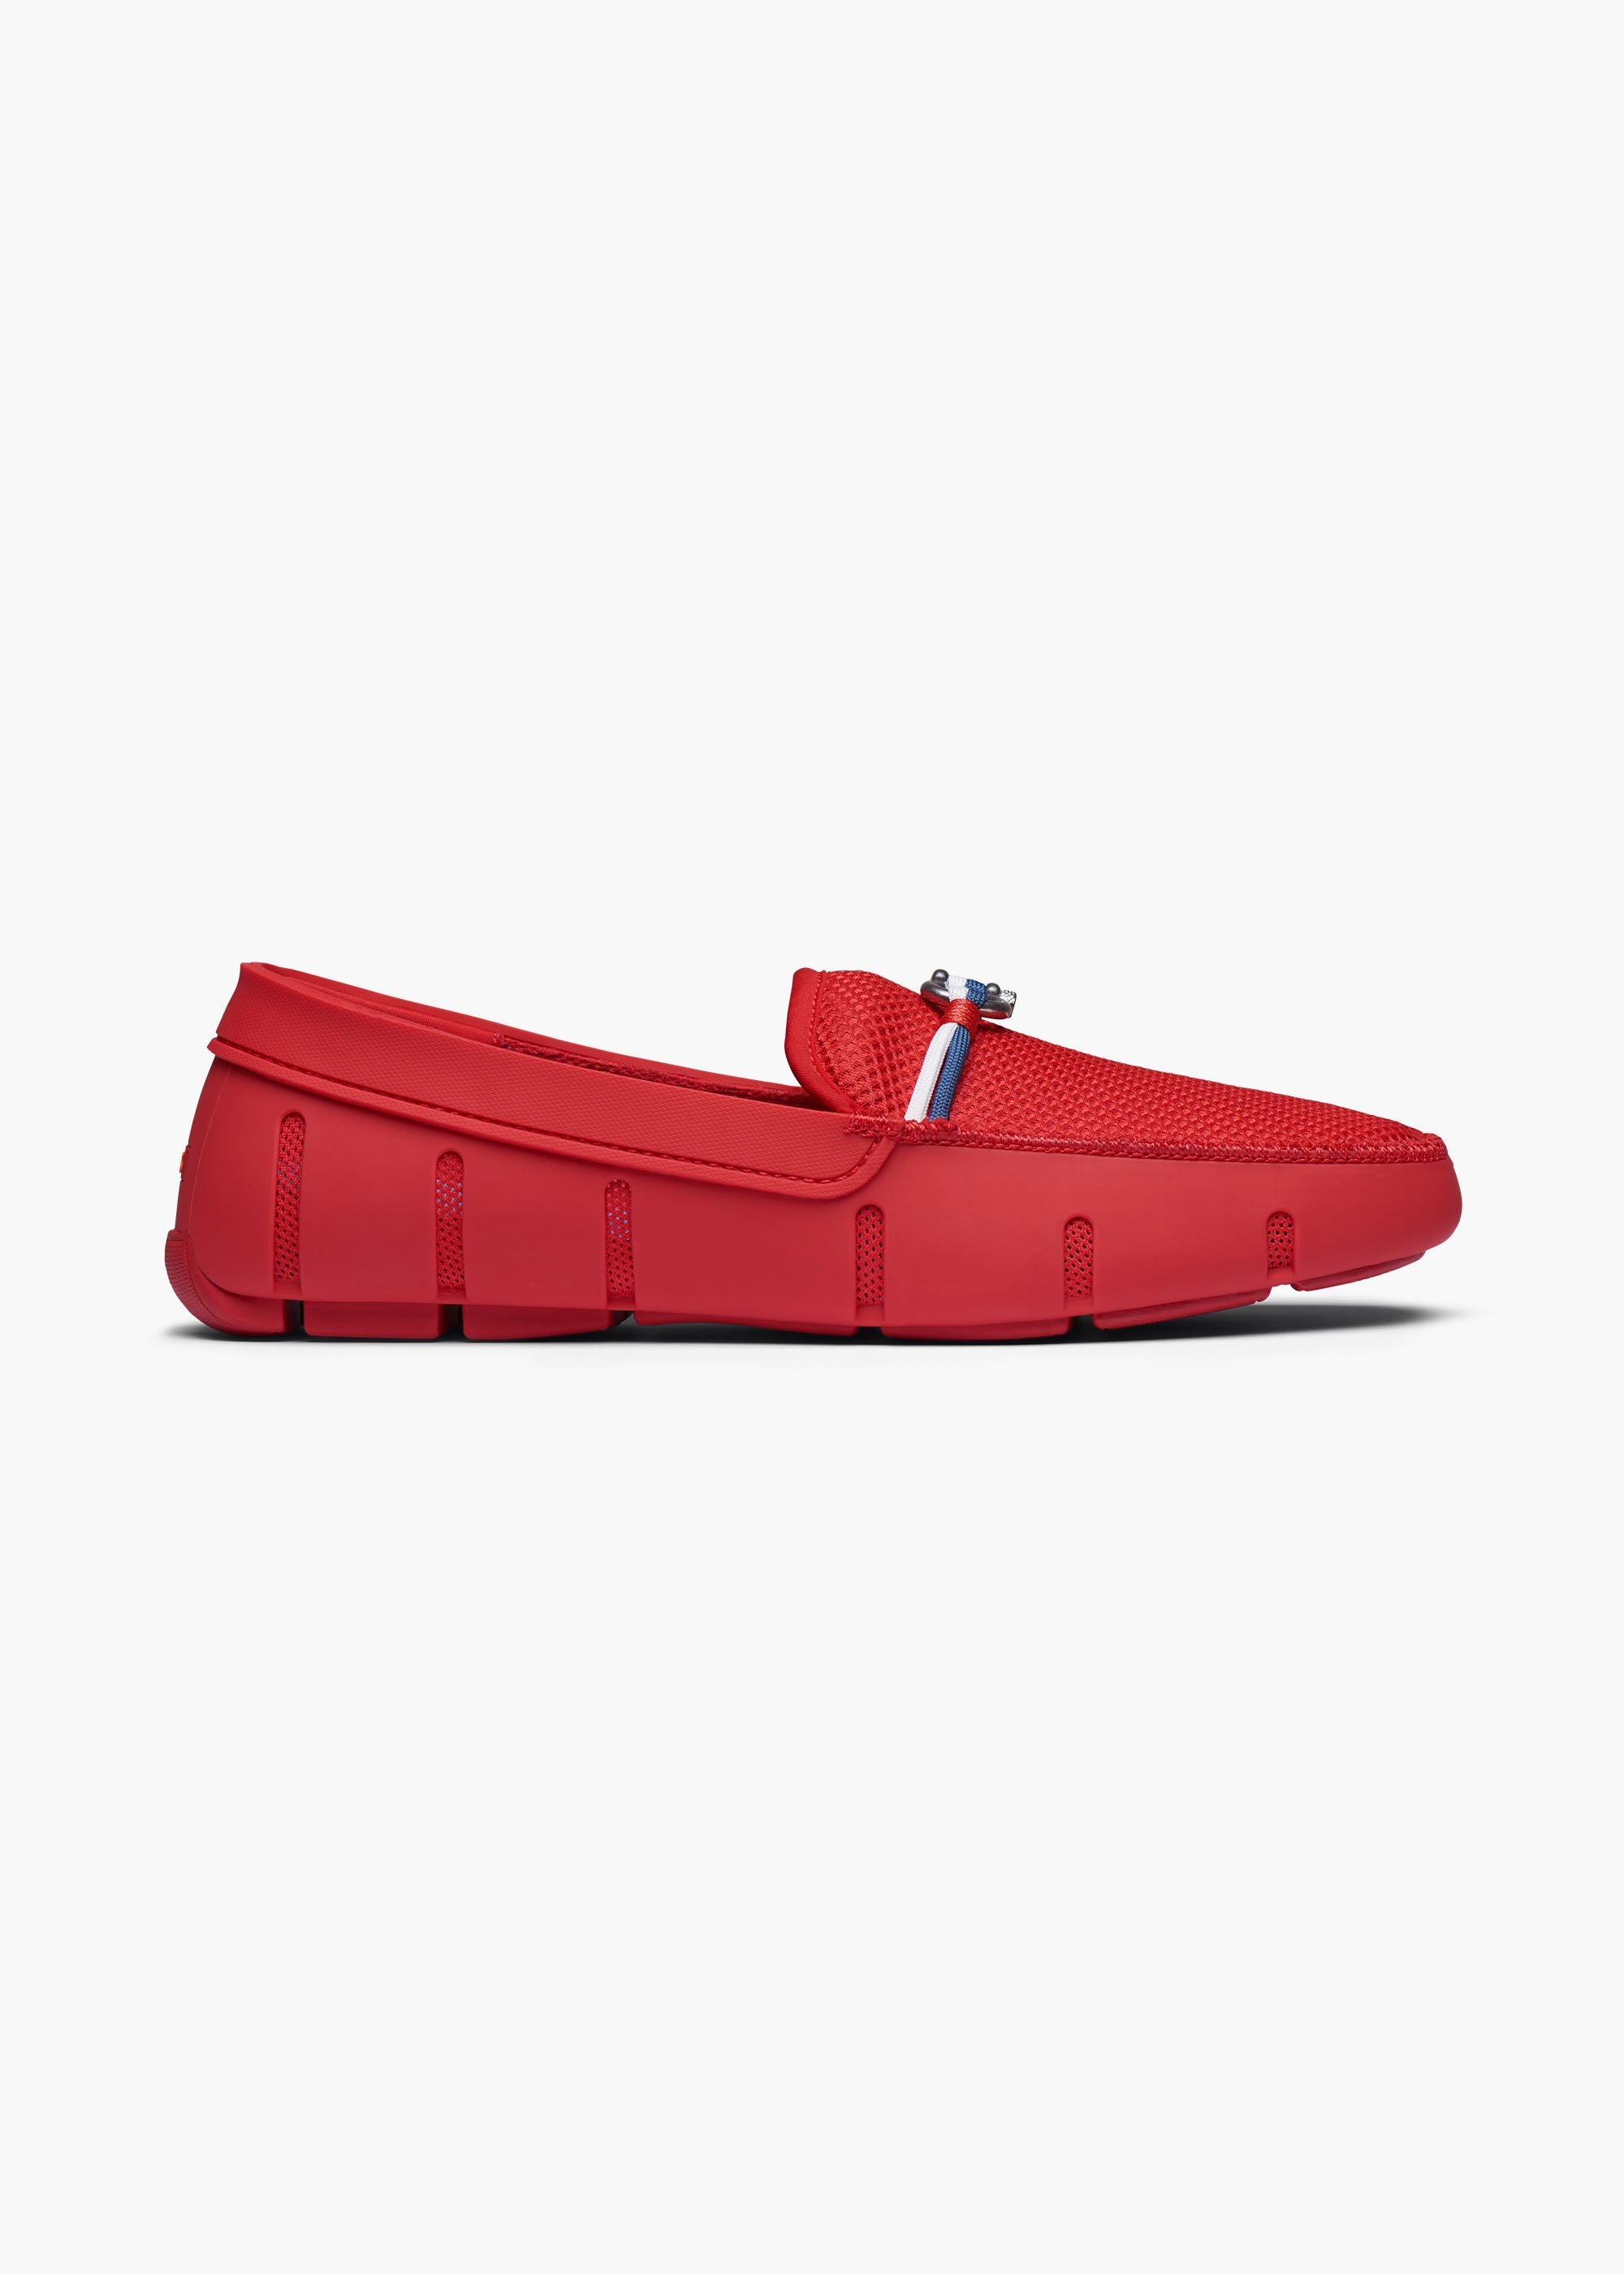 Louis Vuitton Suede Loafers UK 8.5 | 9.5